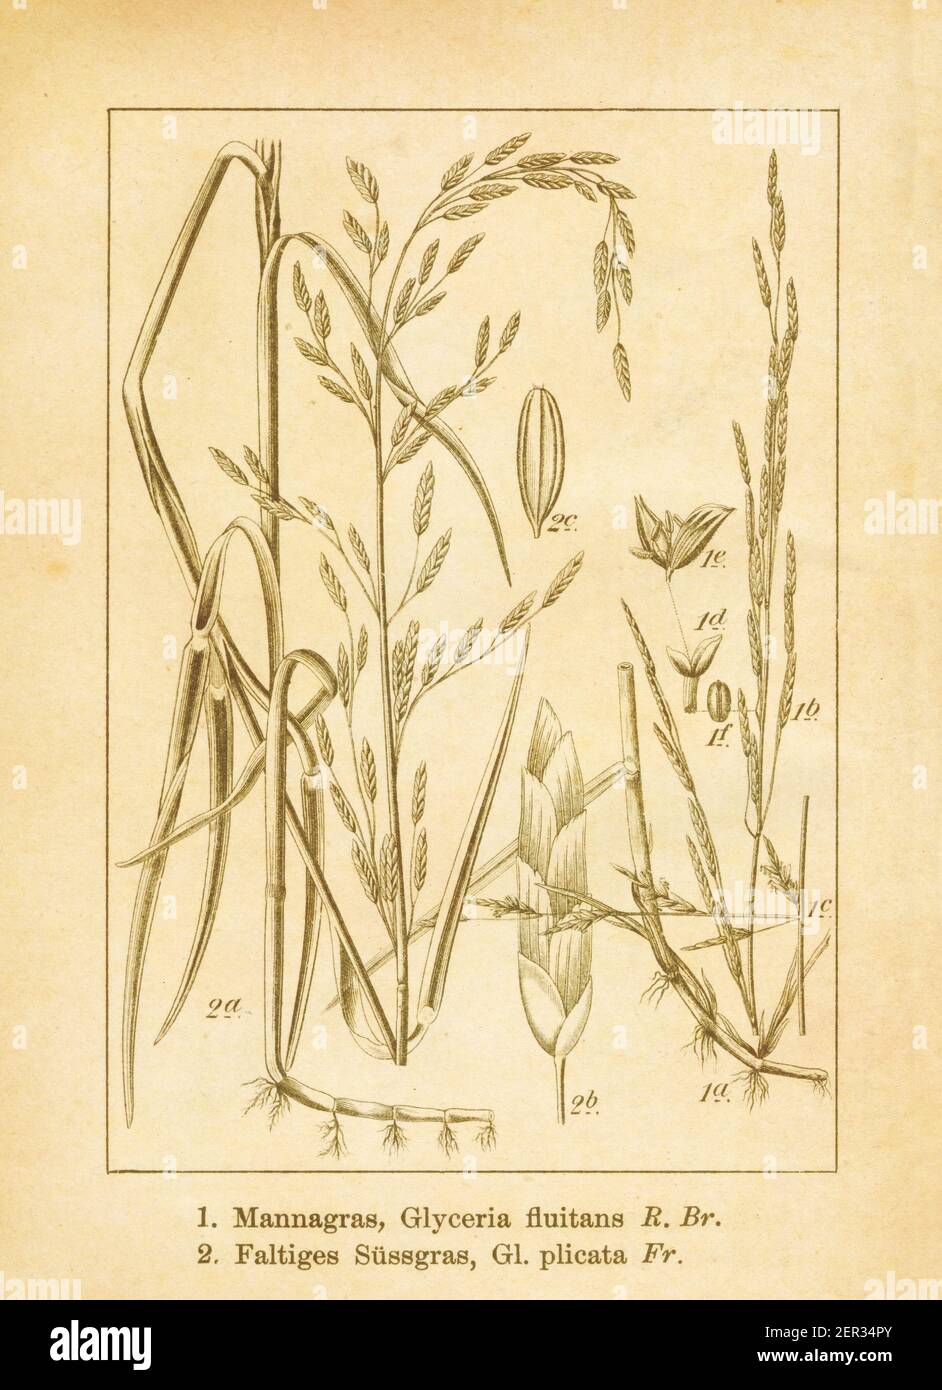 Antique illustration of glyceria fluitans (also known as water mannagrass) and glyceria plicata. Engraved by Jacob Sturm (1771-1848) and published in Stock Photo